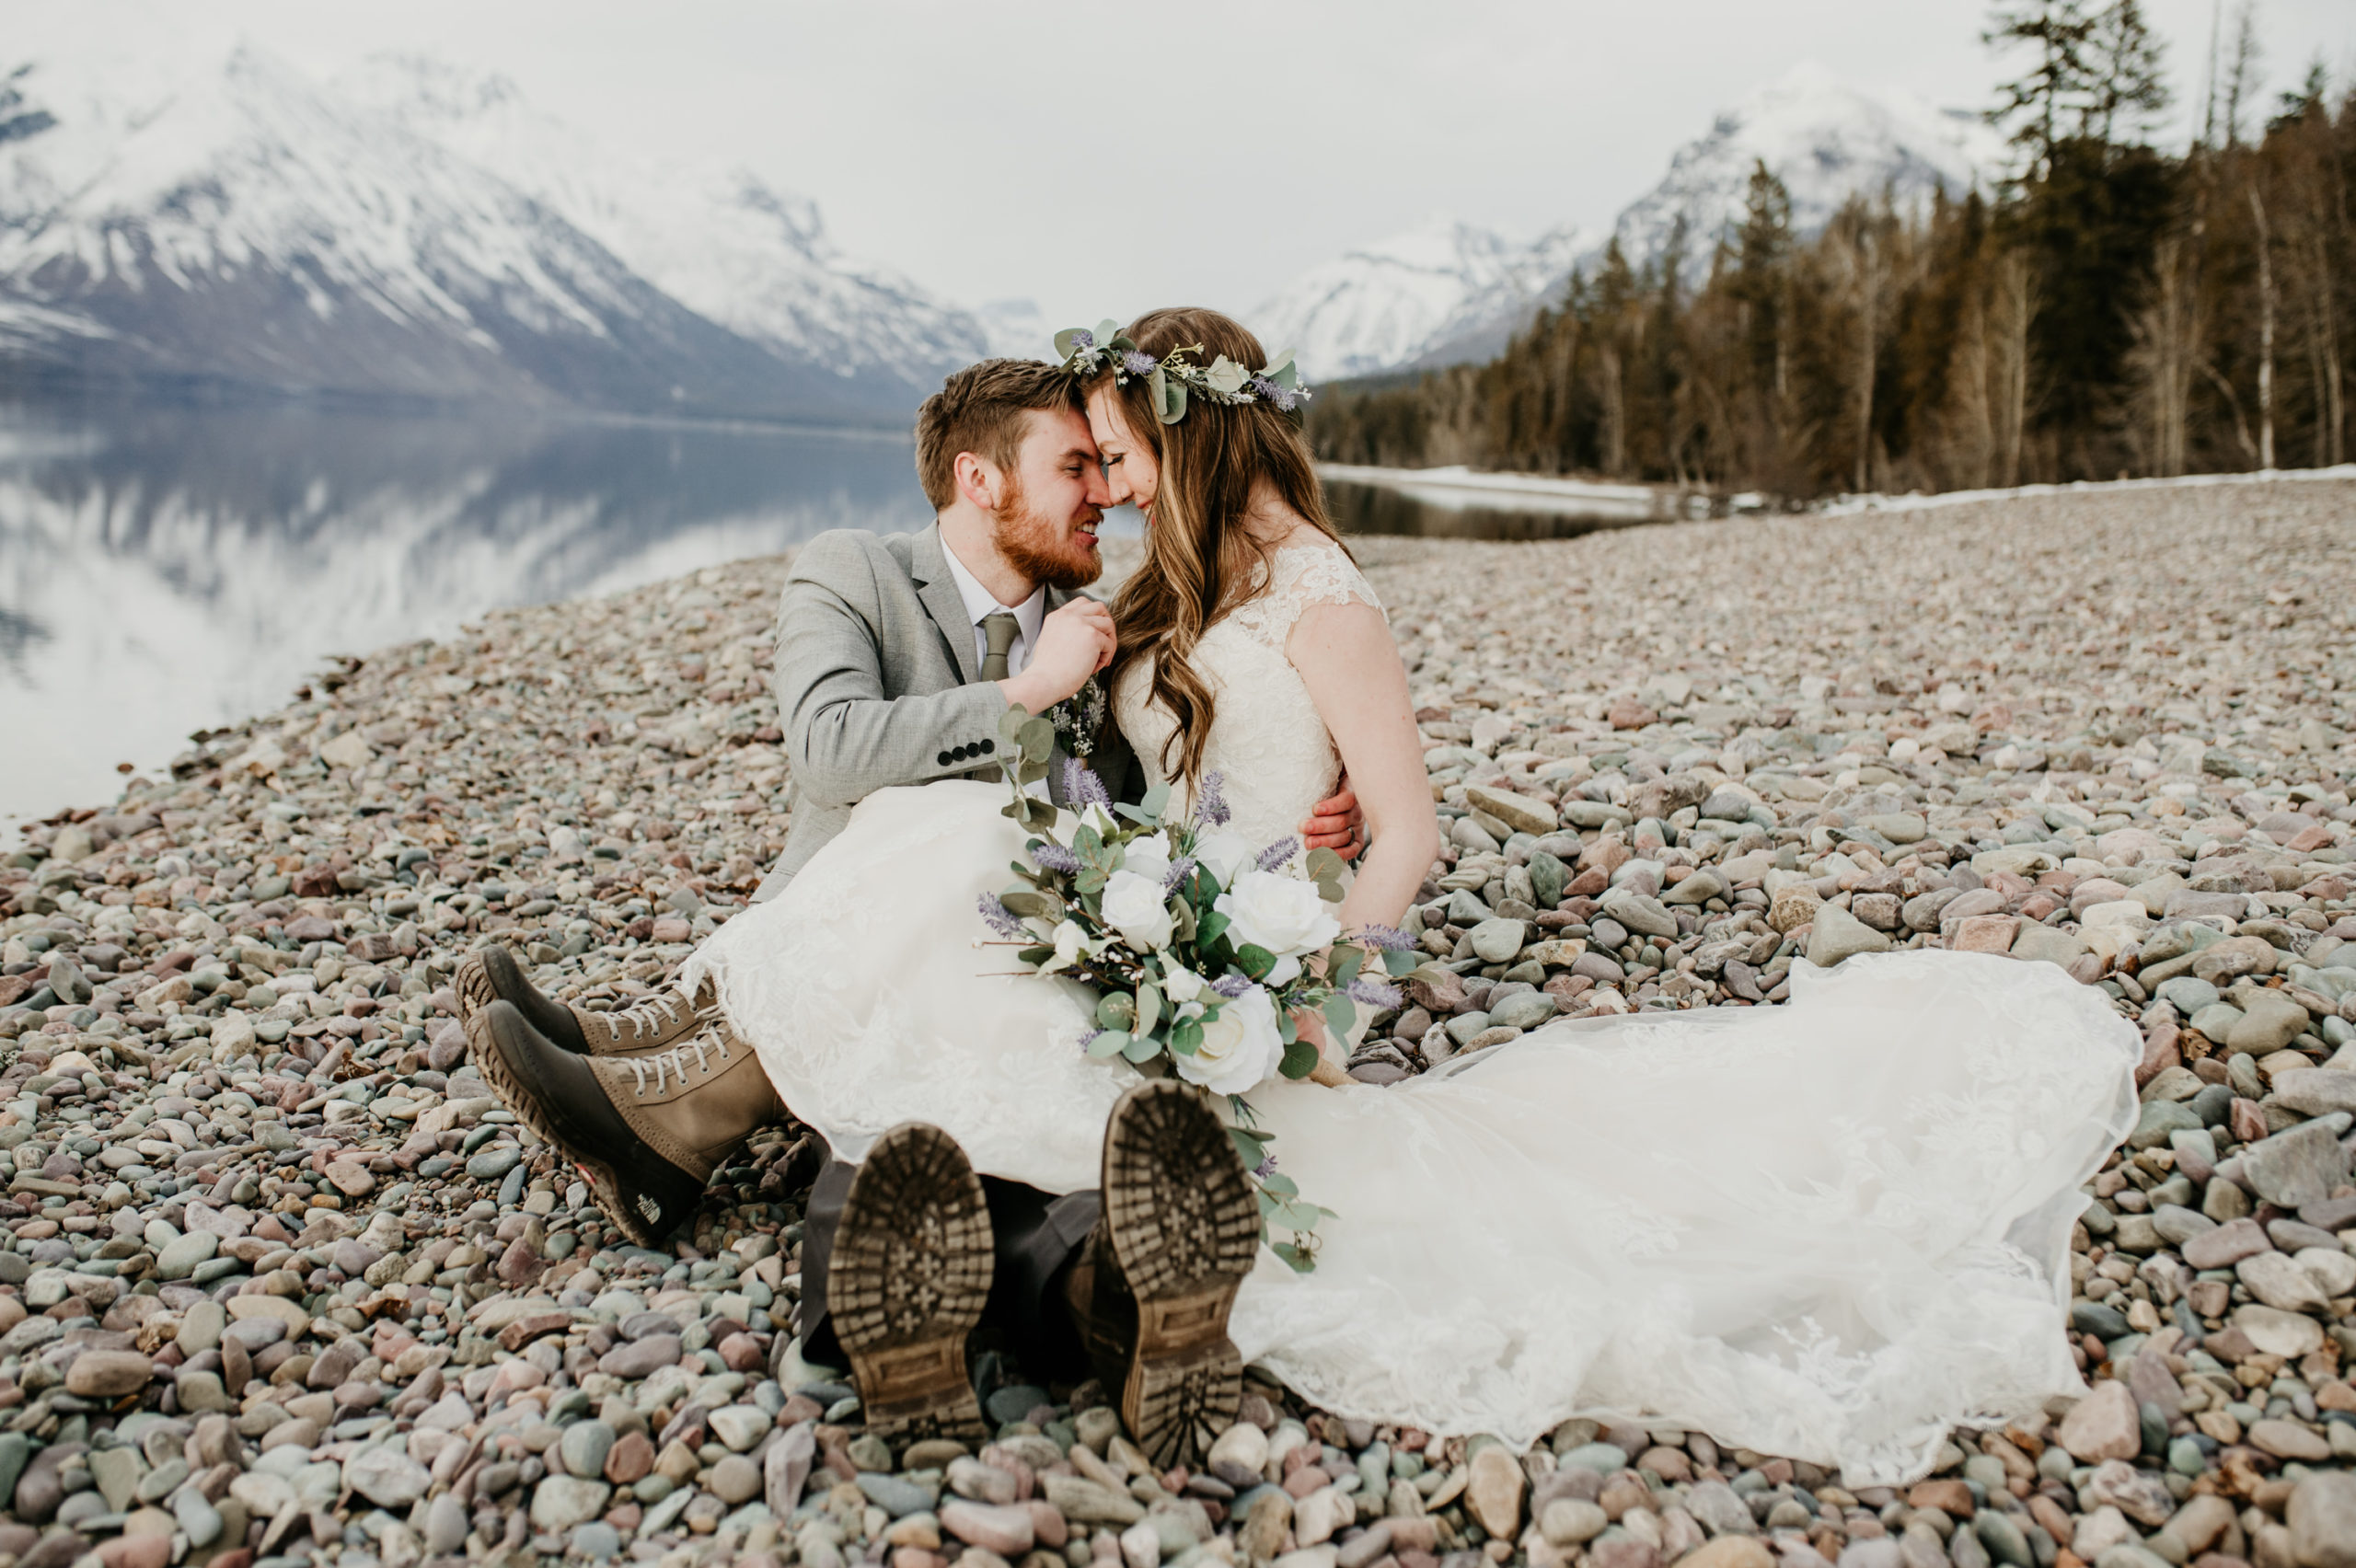 Top 8 Bridal Boots for Mountain Weddings in Winter